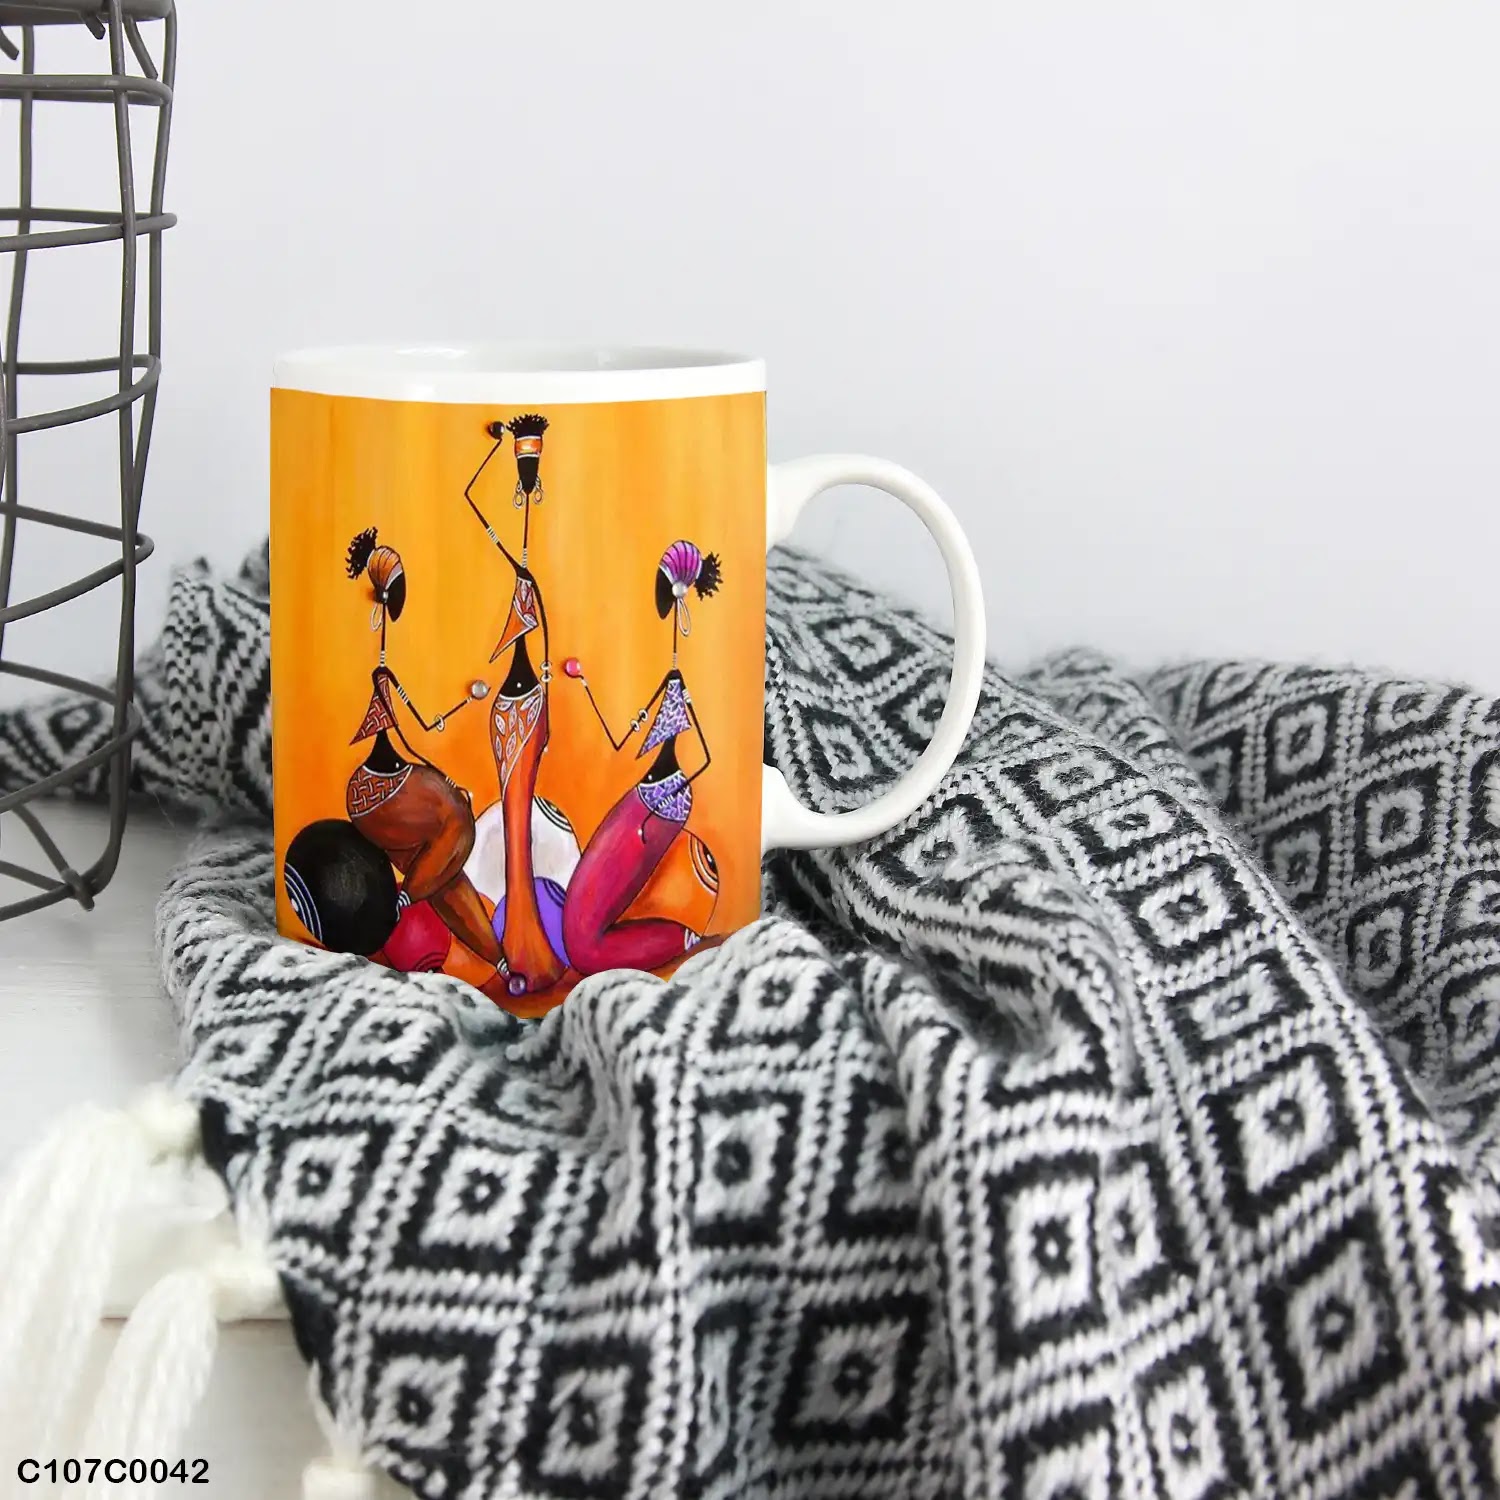 An orange mug (cup) printed with an image of African women